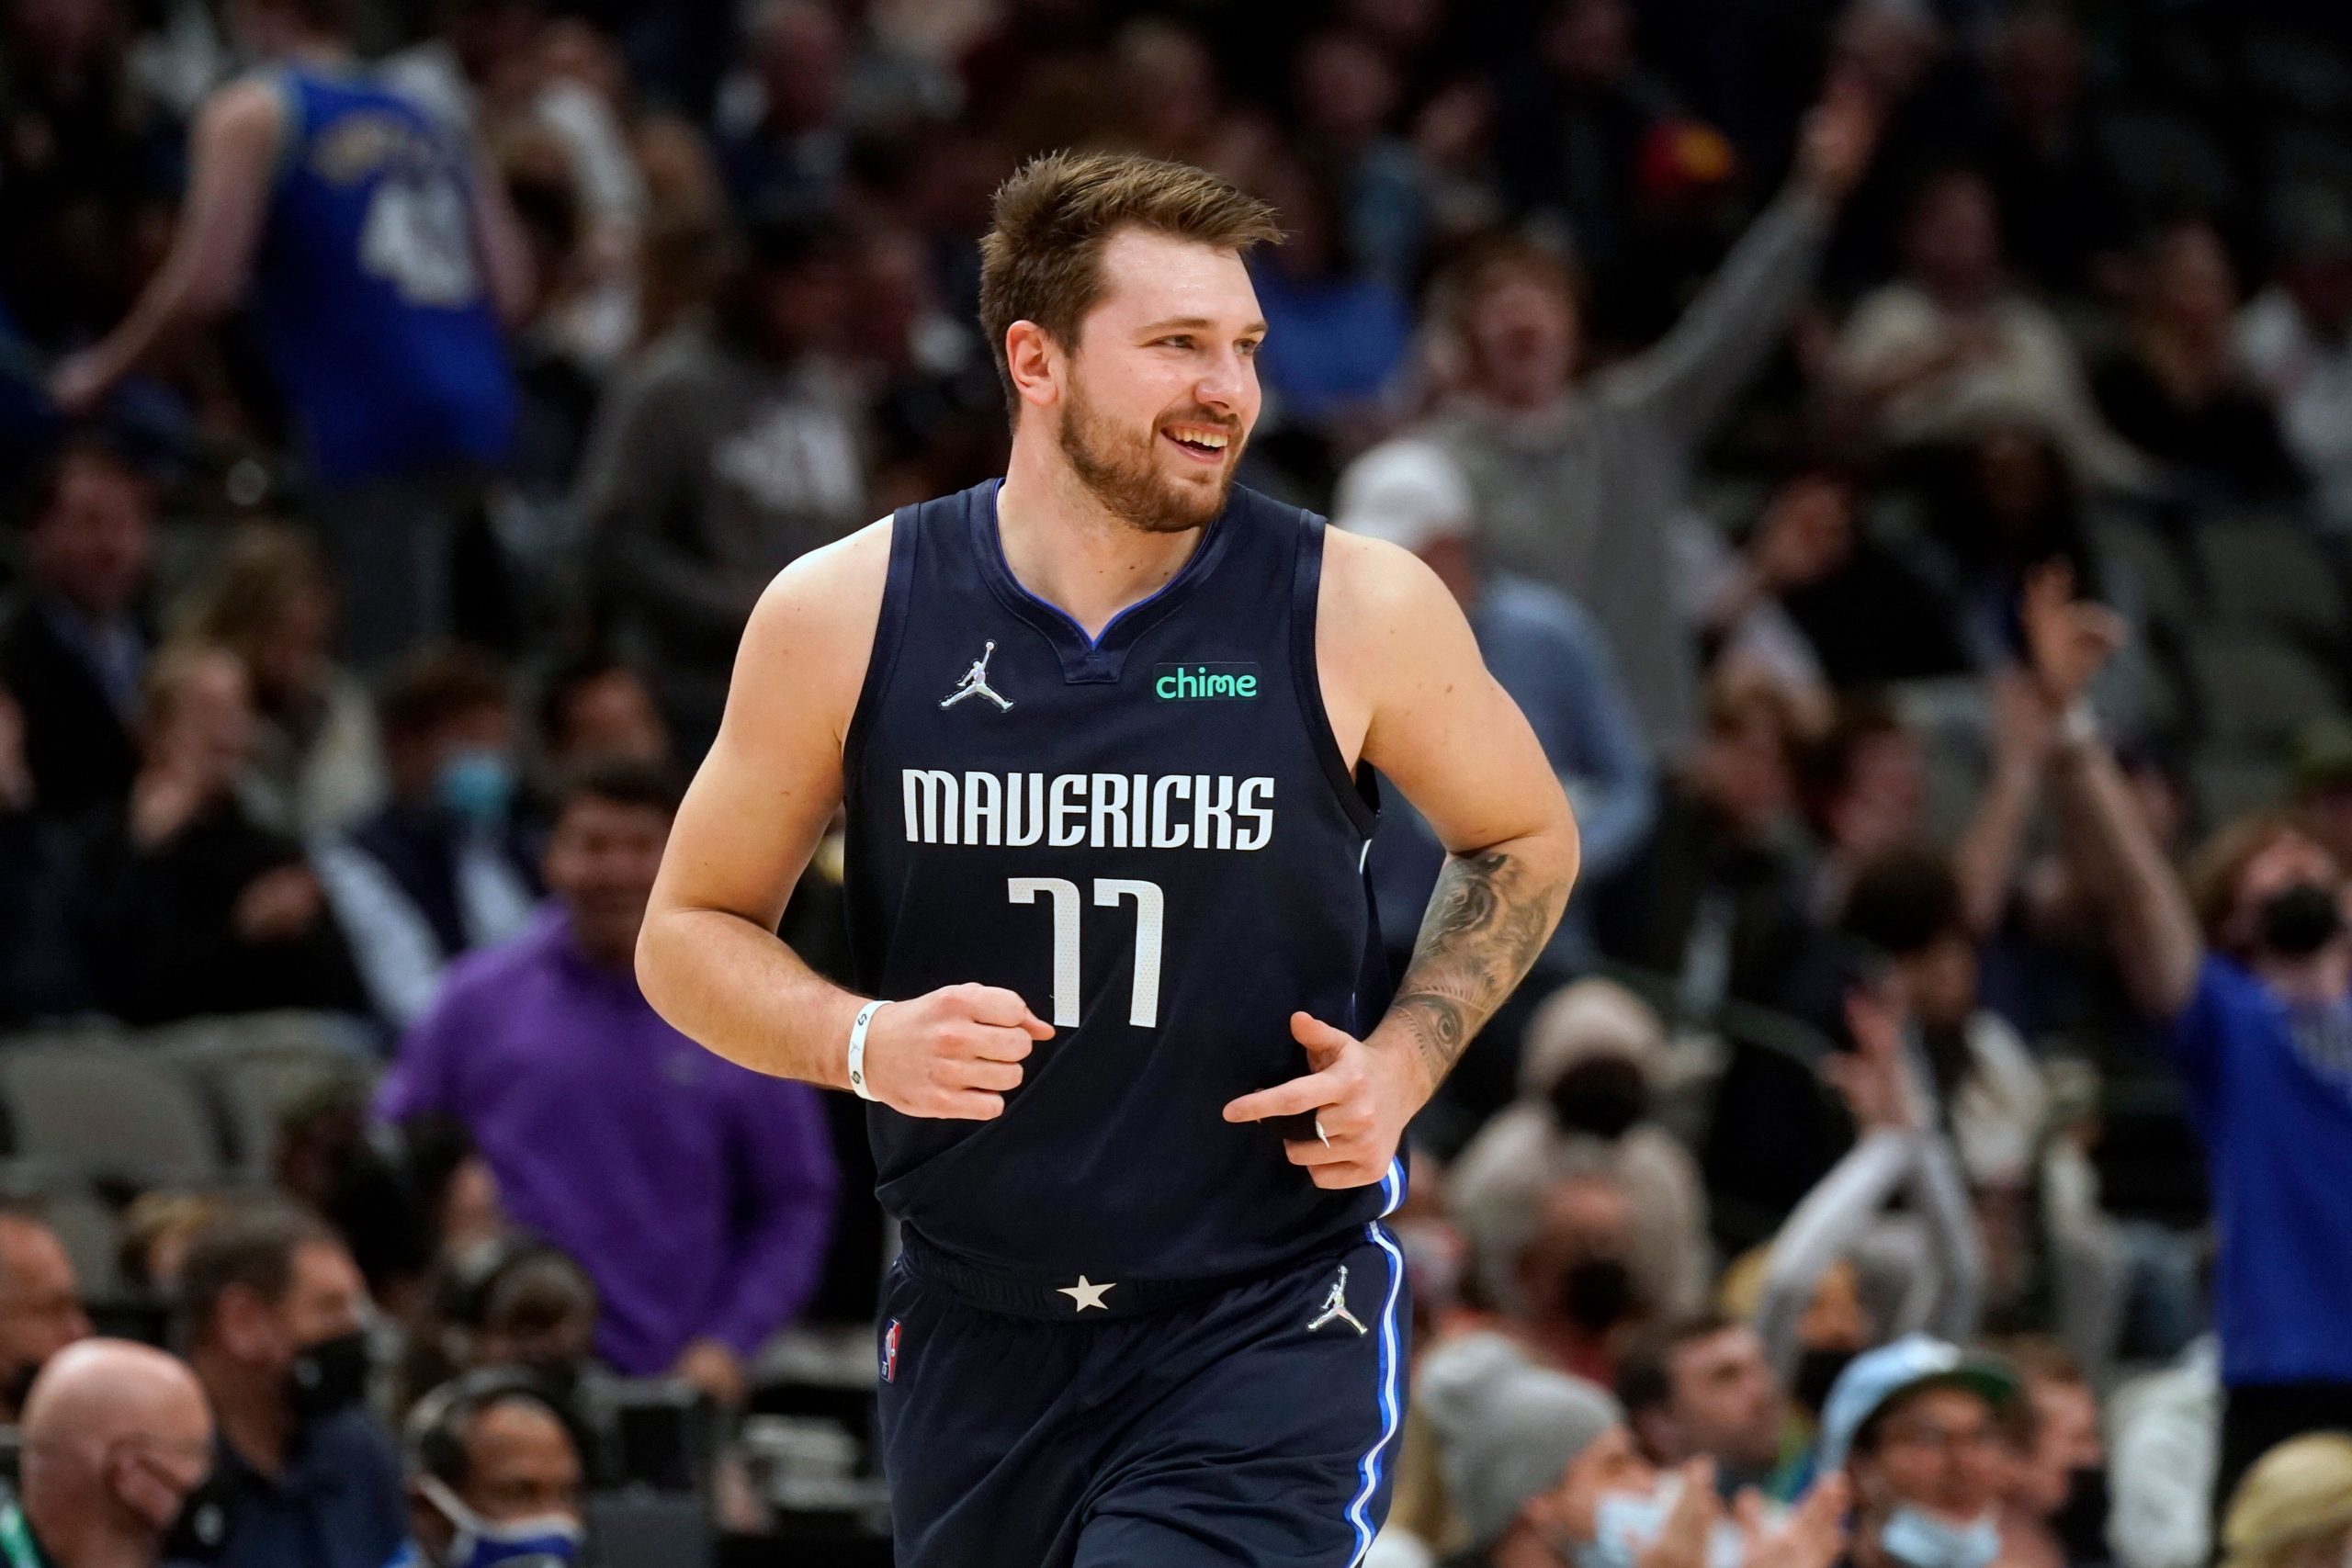 NBA: Dallas Mavericks’ Luka Doncic sets season’s high for quarter with 28 in 1st